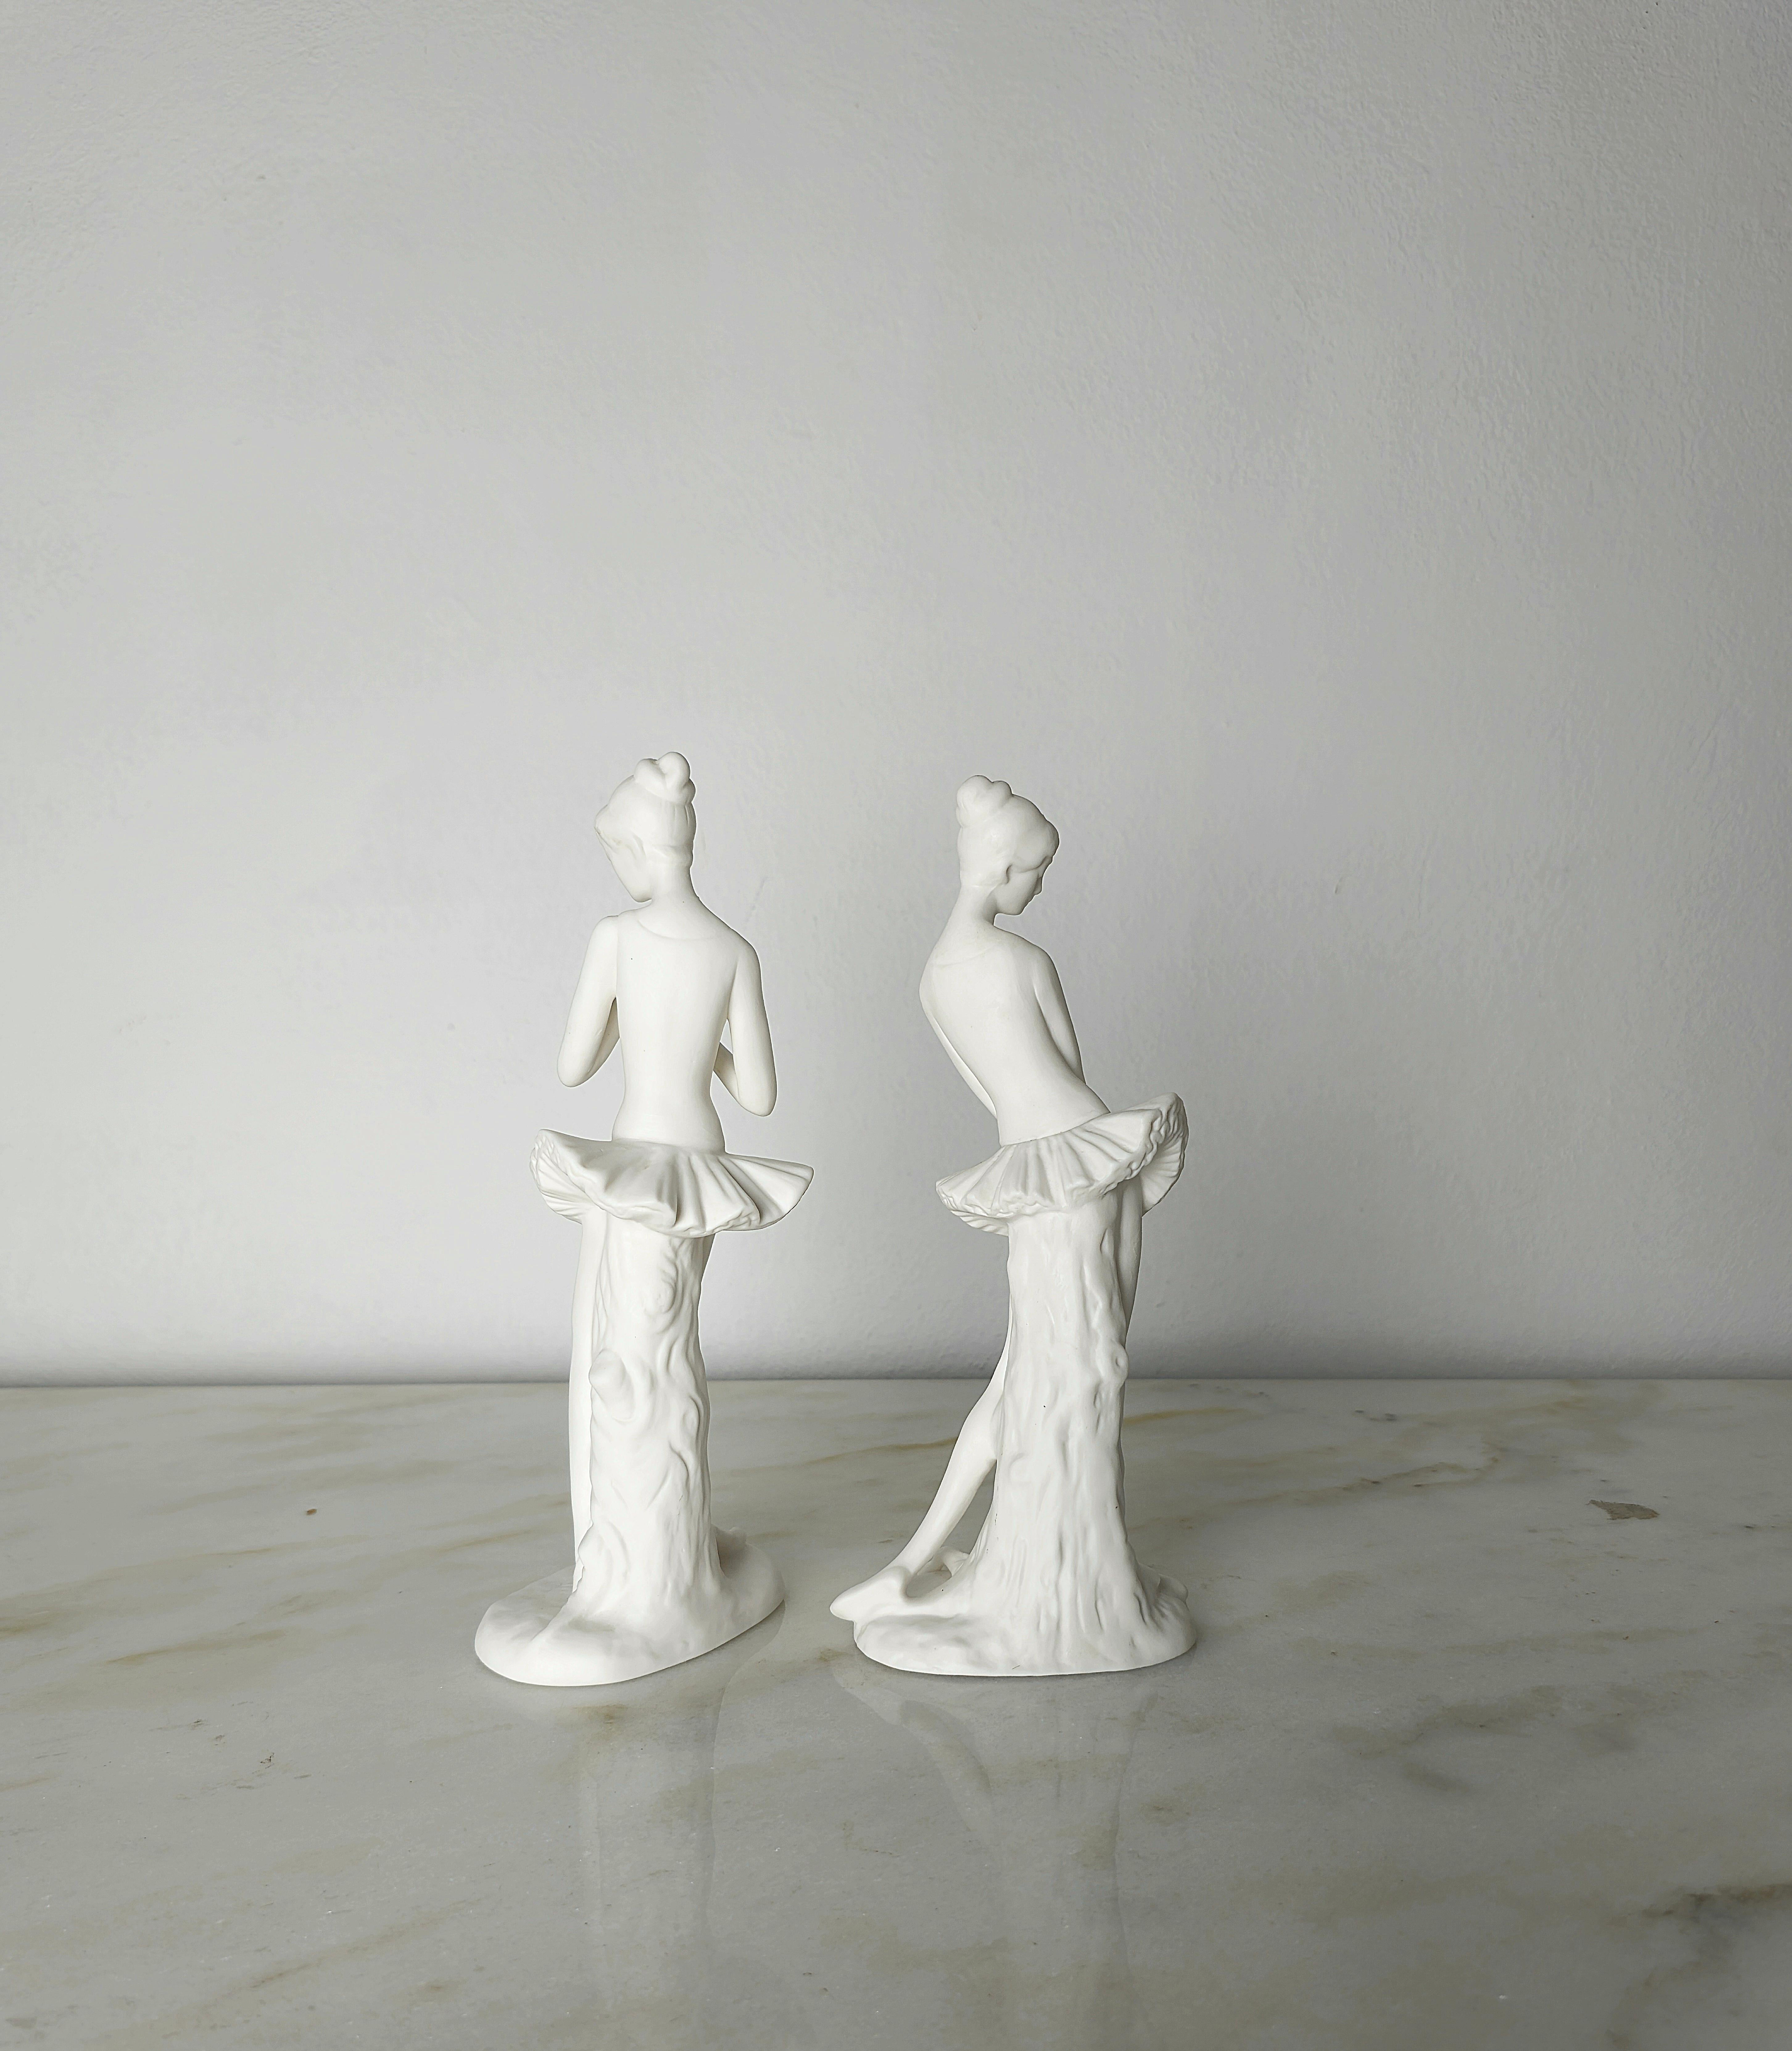 Sculptures Decorative Objects Porcelain Biscuit Midcentury Italy 1950s Set of 2 For Sale 3